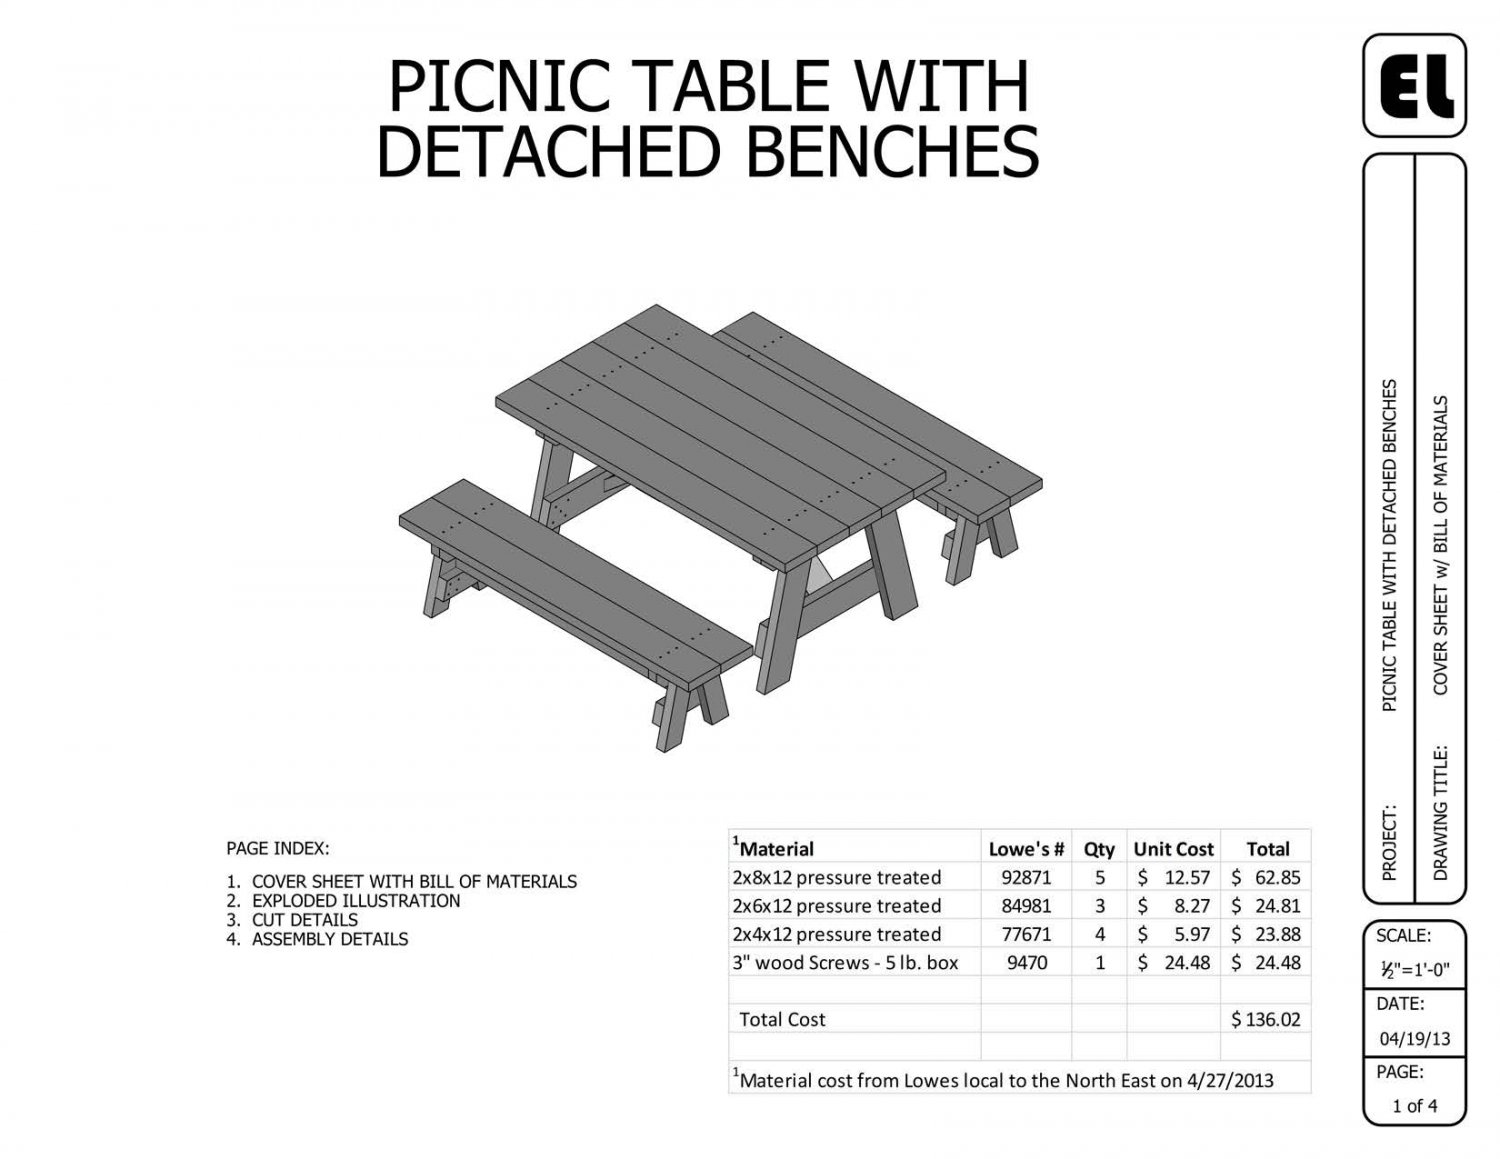 6 Picnic Table And Benches Building Plans Blueprints Diy Do It Yourself Get Them For Free